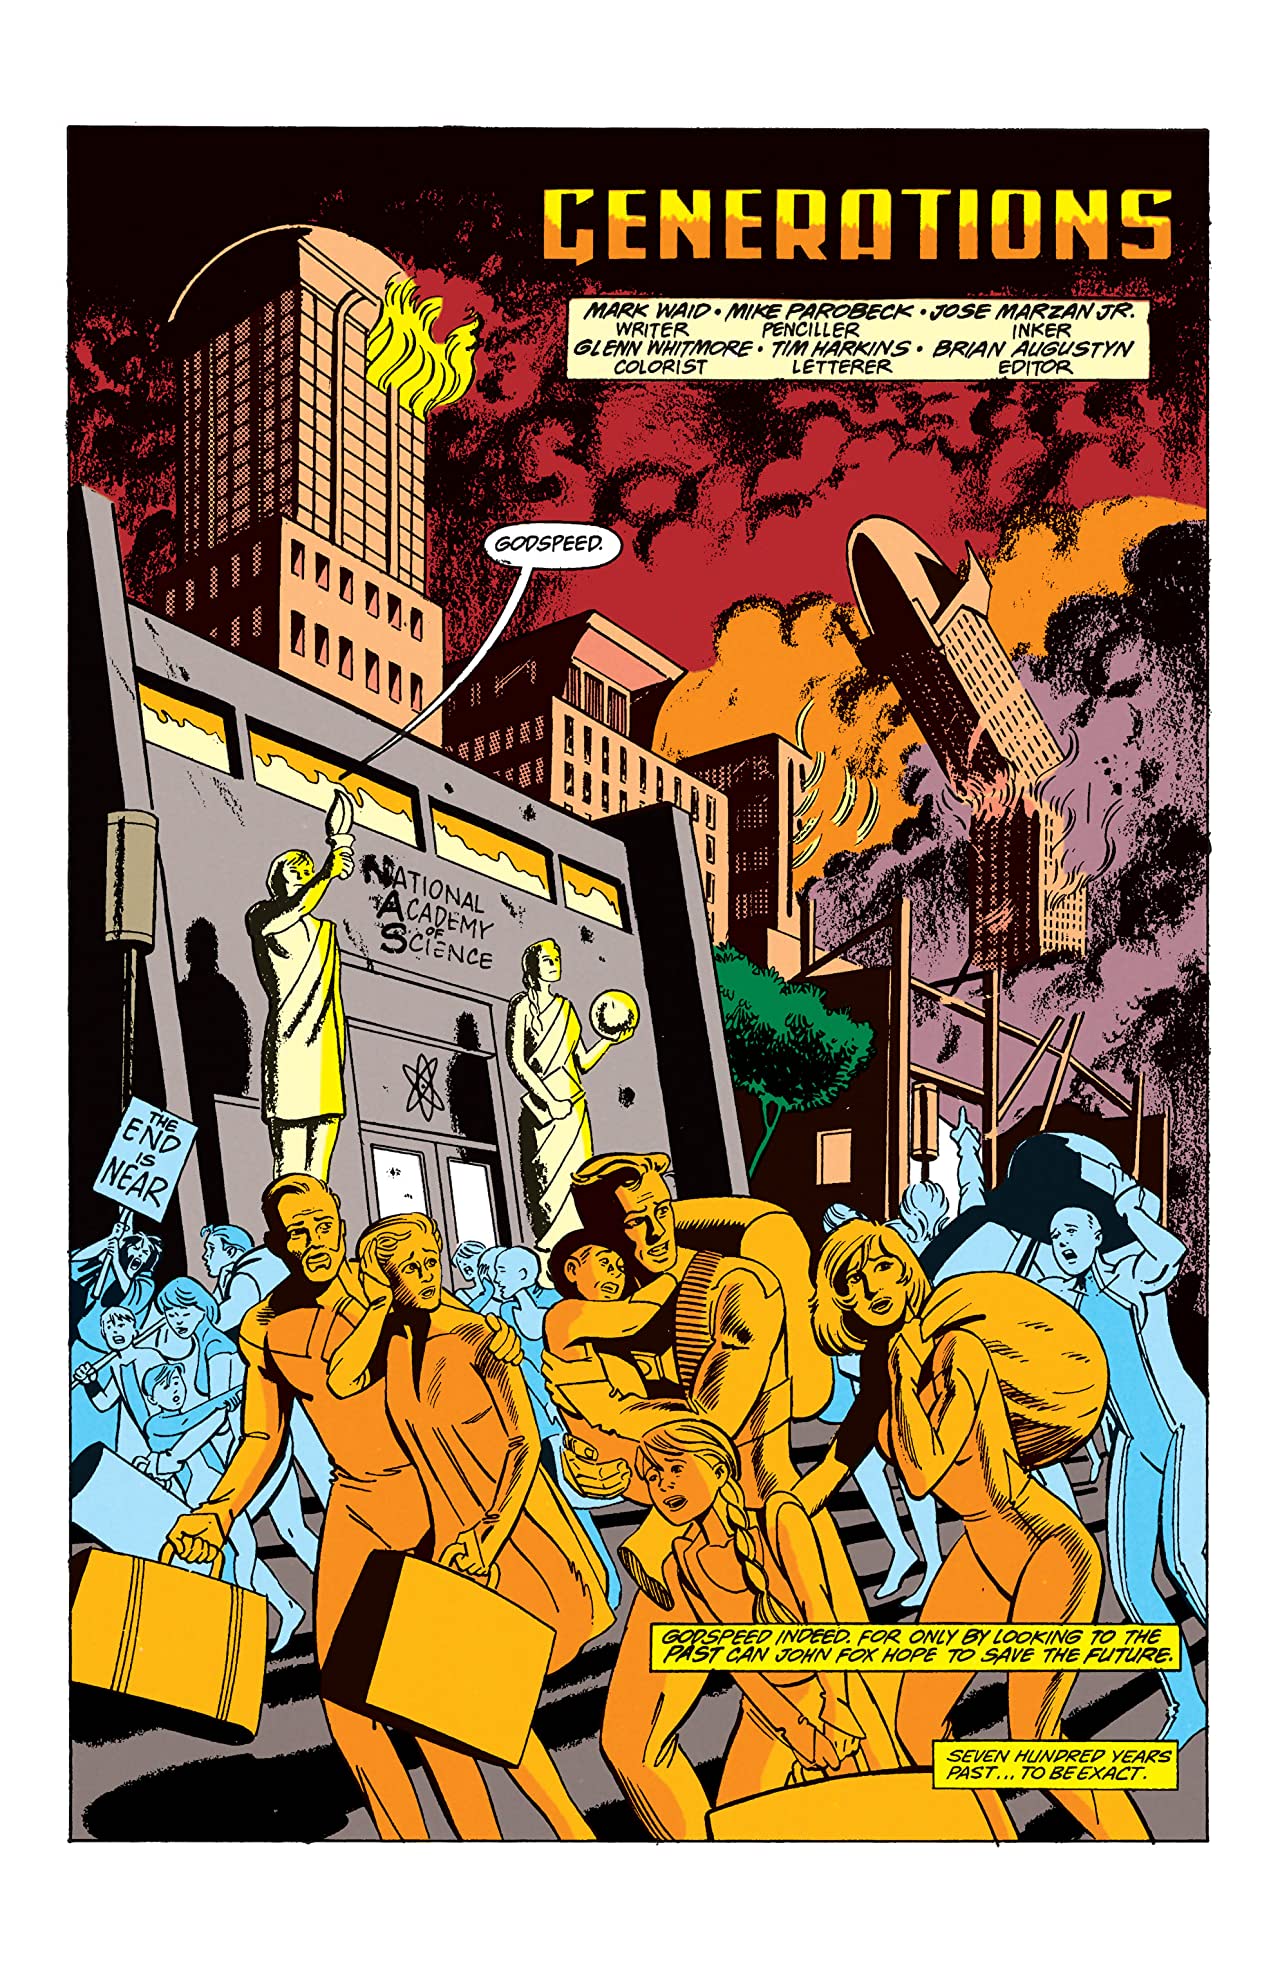 The Flash 50th Anniversary Special #1 - Central City crumbles in the far off year of 2645 A.D..